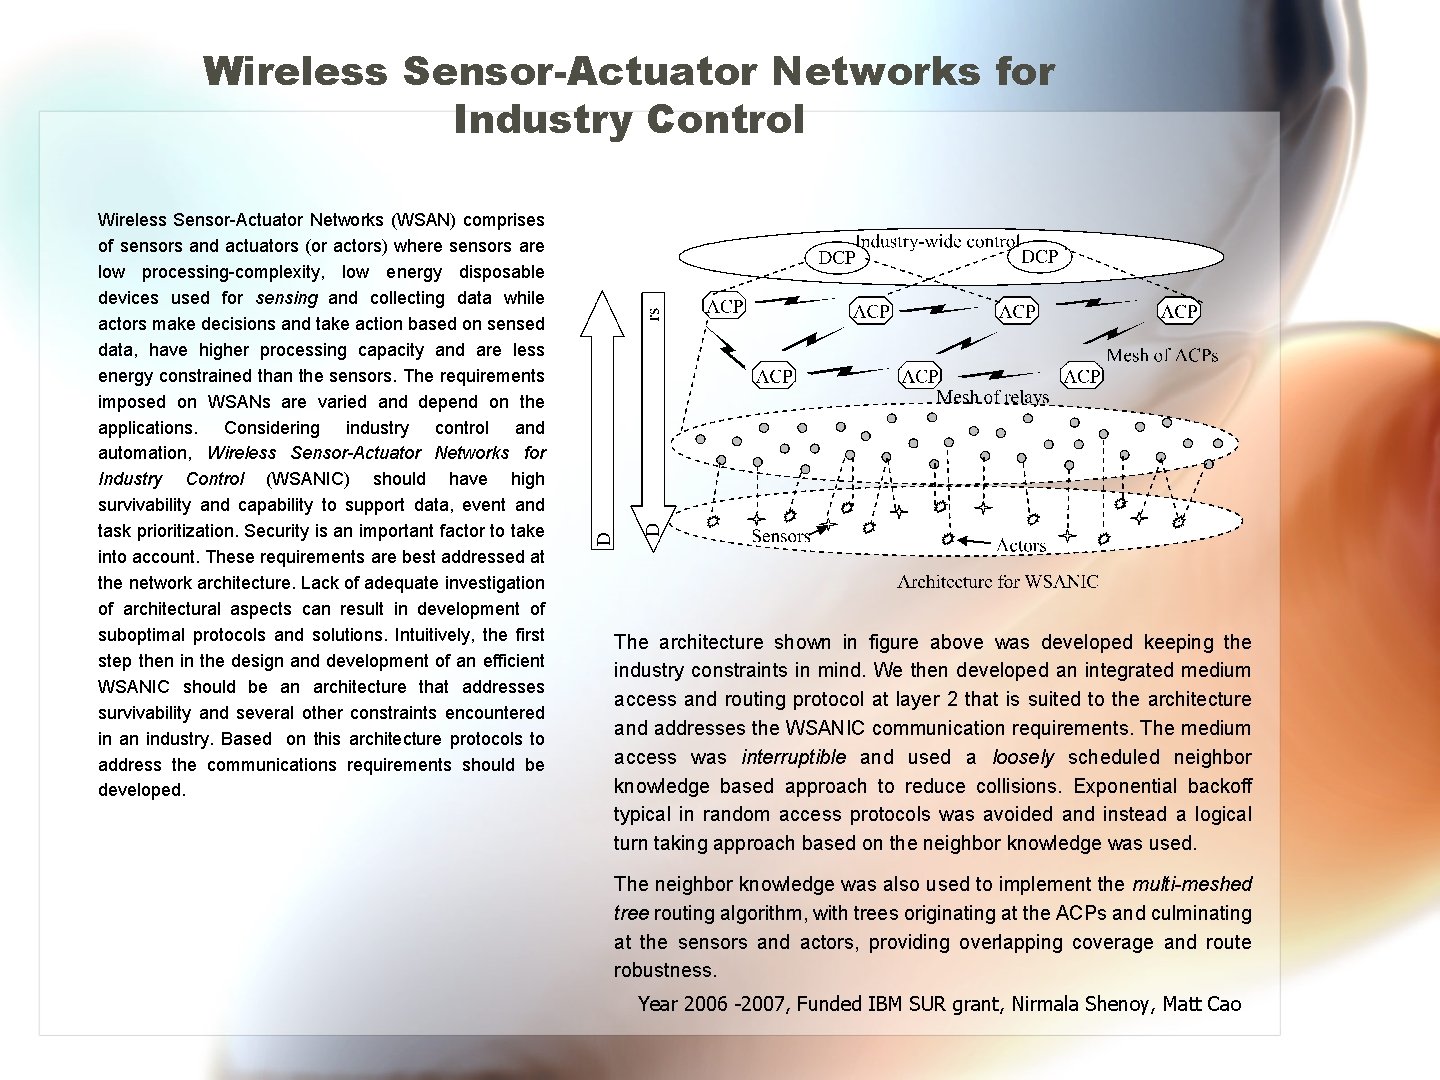 Wireless Sensor-Actuator Networks for Industry Control Wireless Sensor-Actuator Networks (WSAN) comprises of sensors and